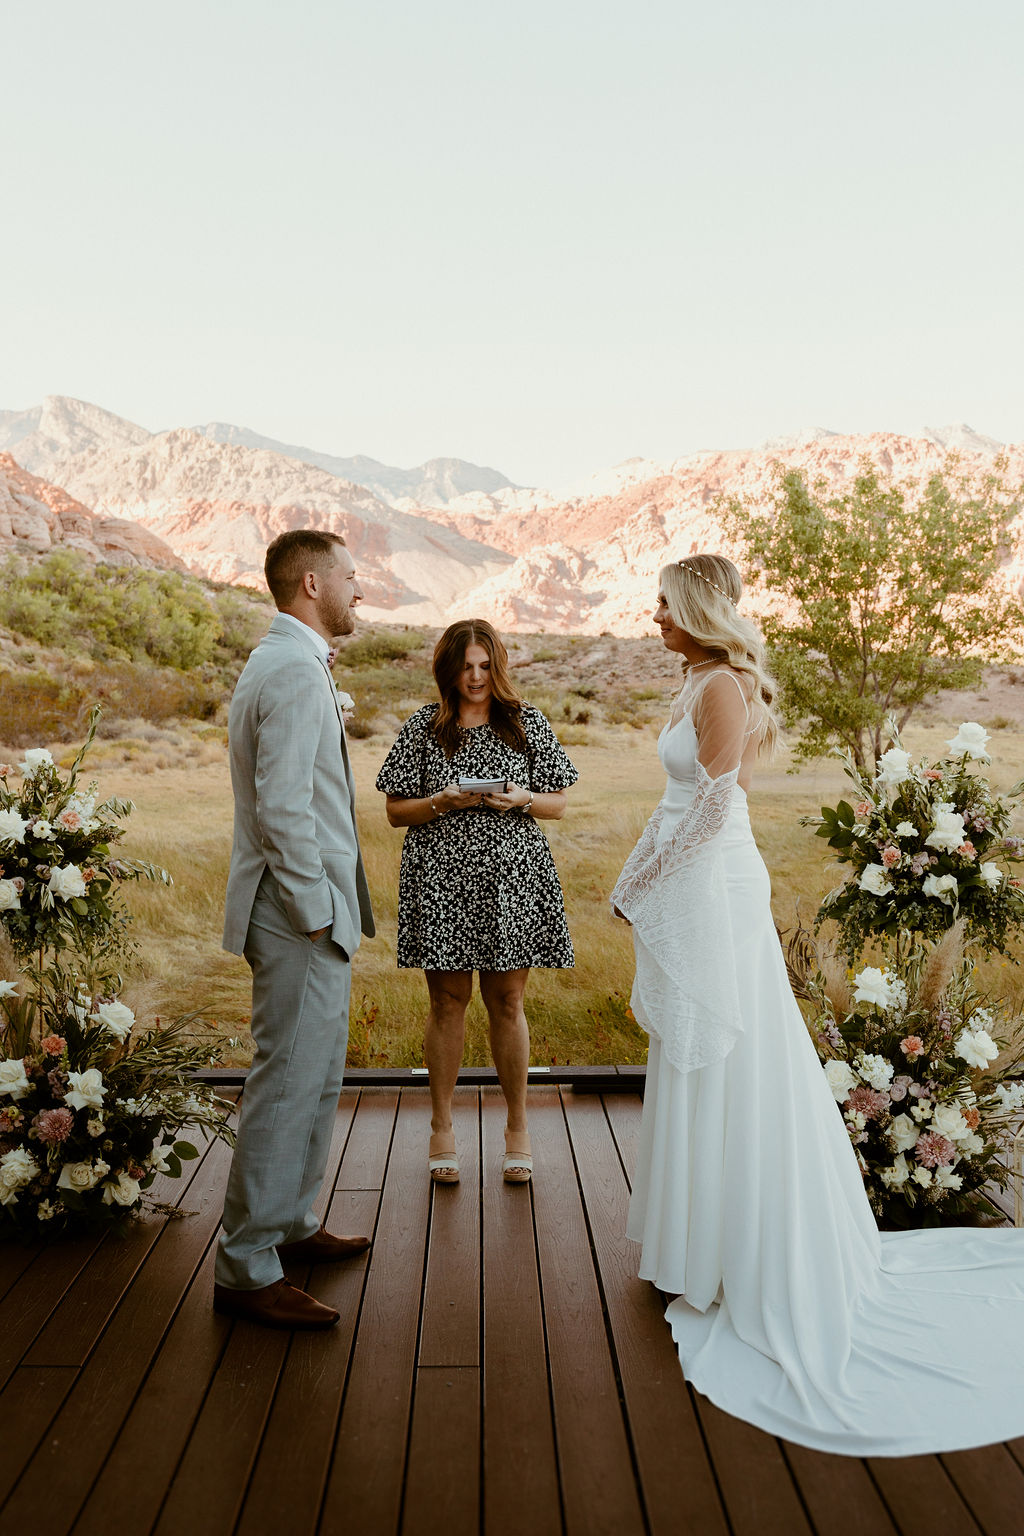 Red Rock Desert & Neon Vegas Lights. Bride and groom standing at the altar